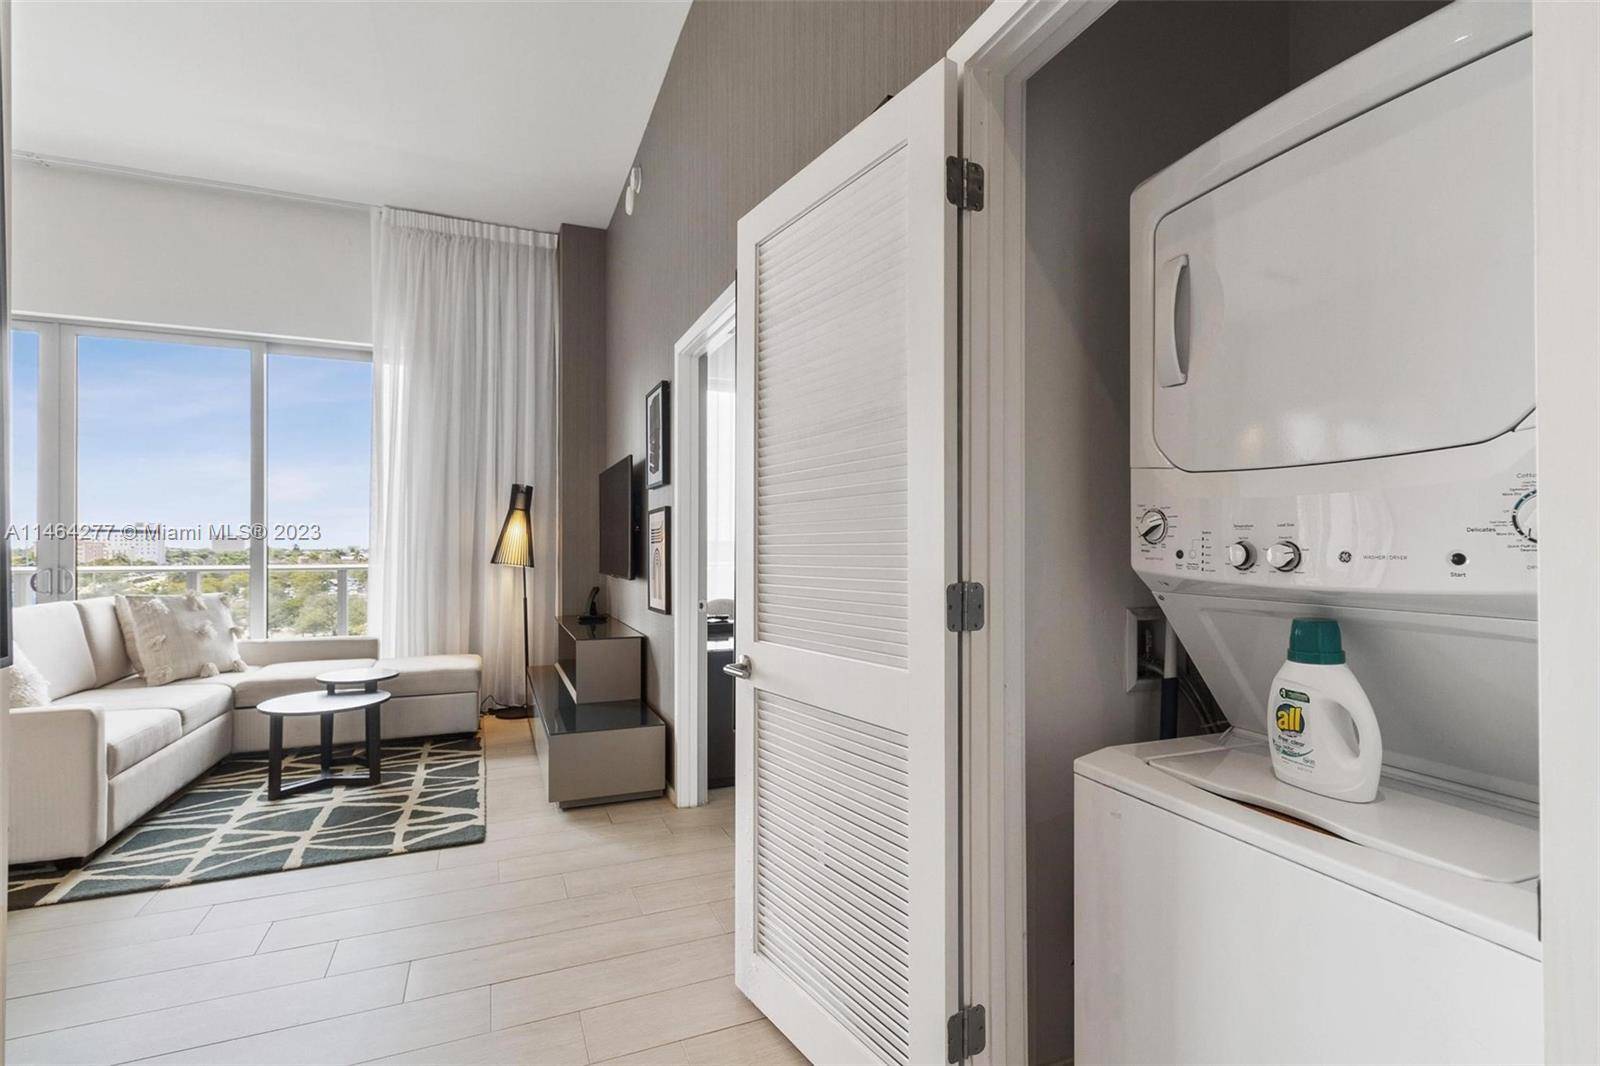 Brand New Luxury Condominium with outstanding amenities, Brand new Apartment on the 4th floor with high ceiling overlooking the Intracoastal.